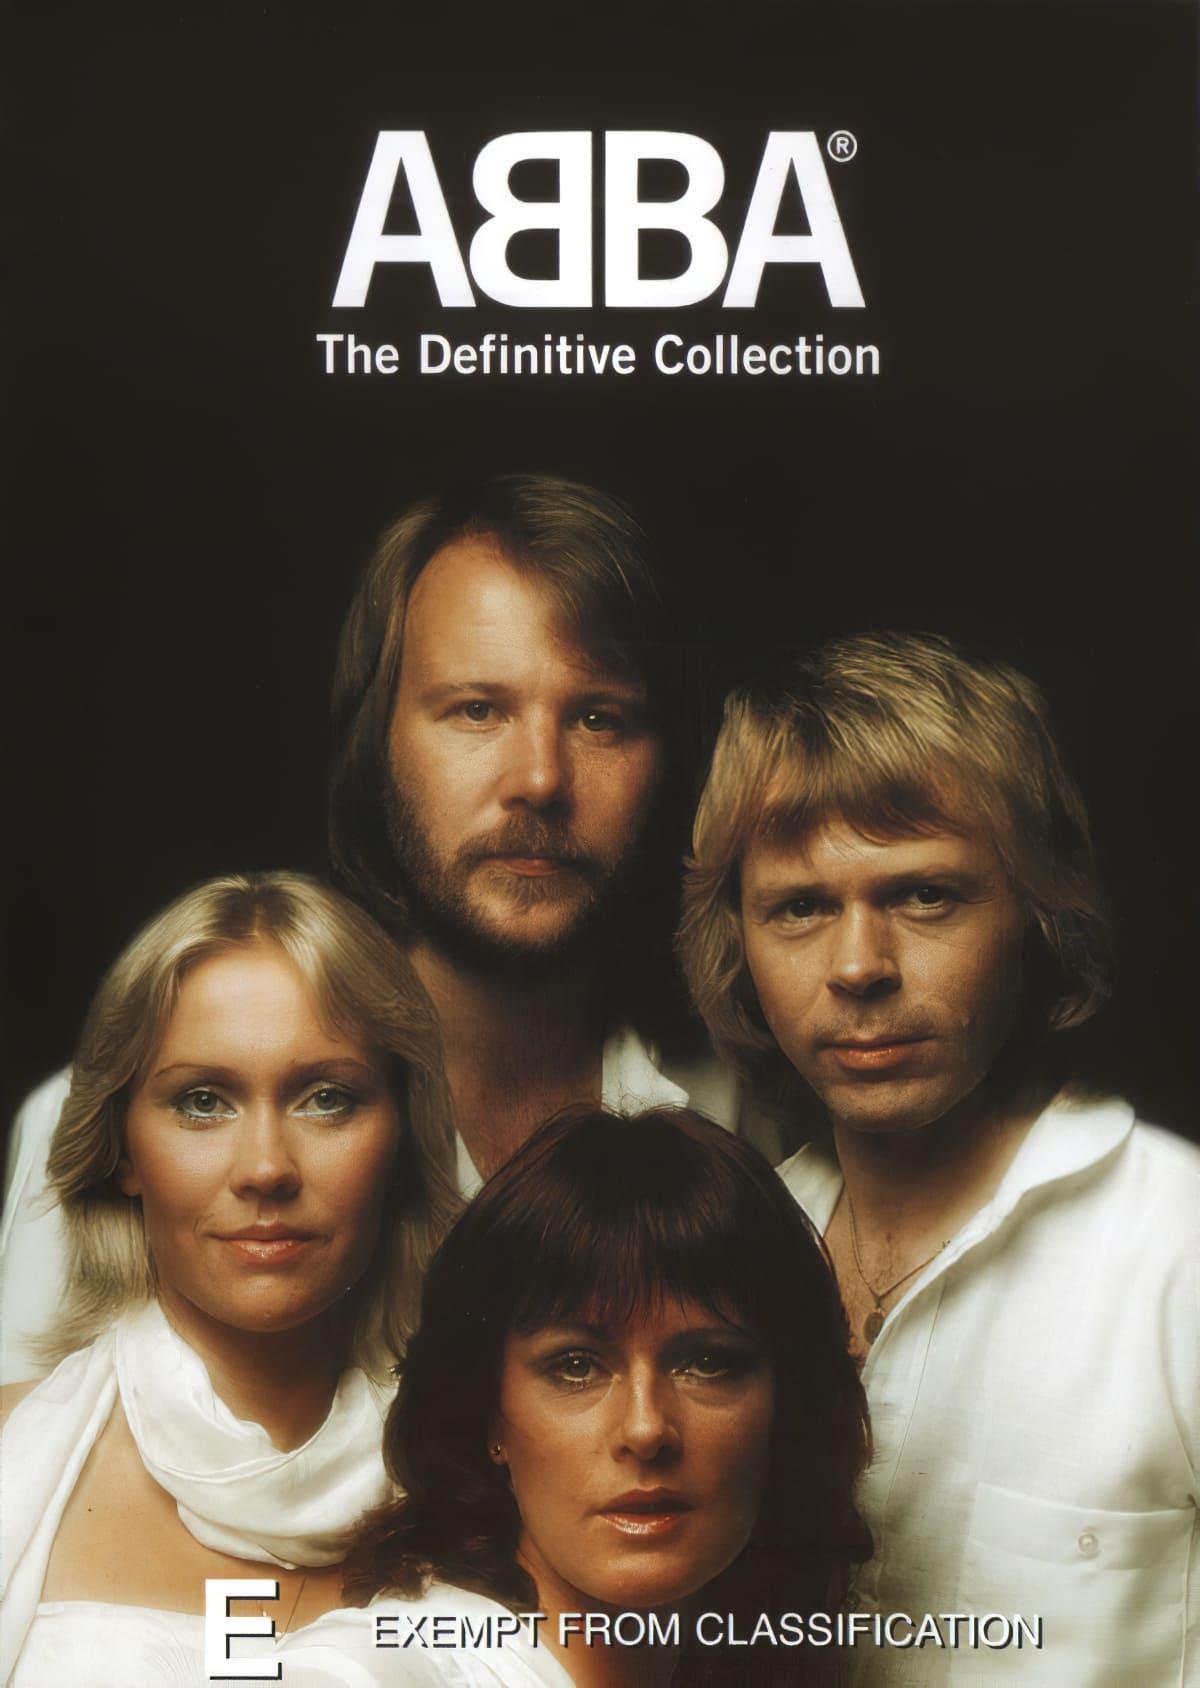 ABBA: The Definitive Collection poster